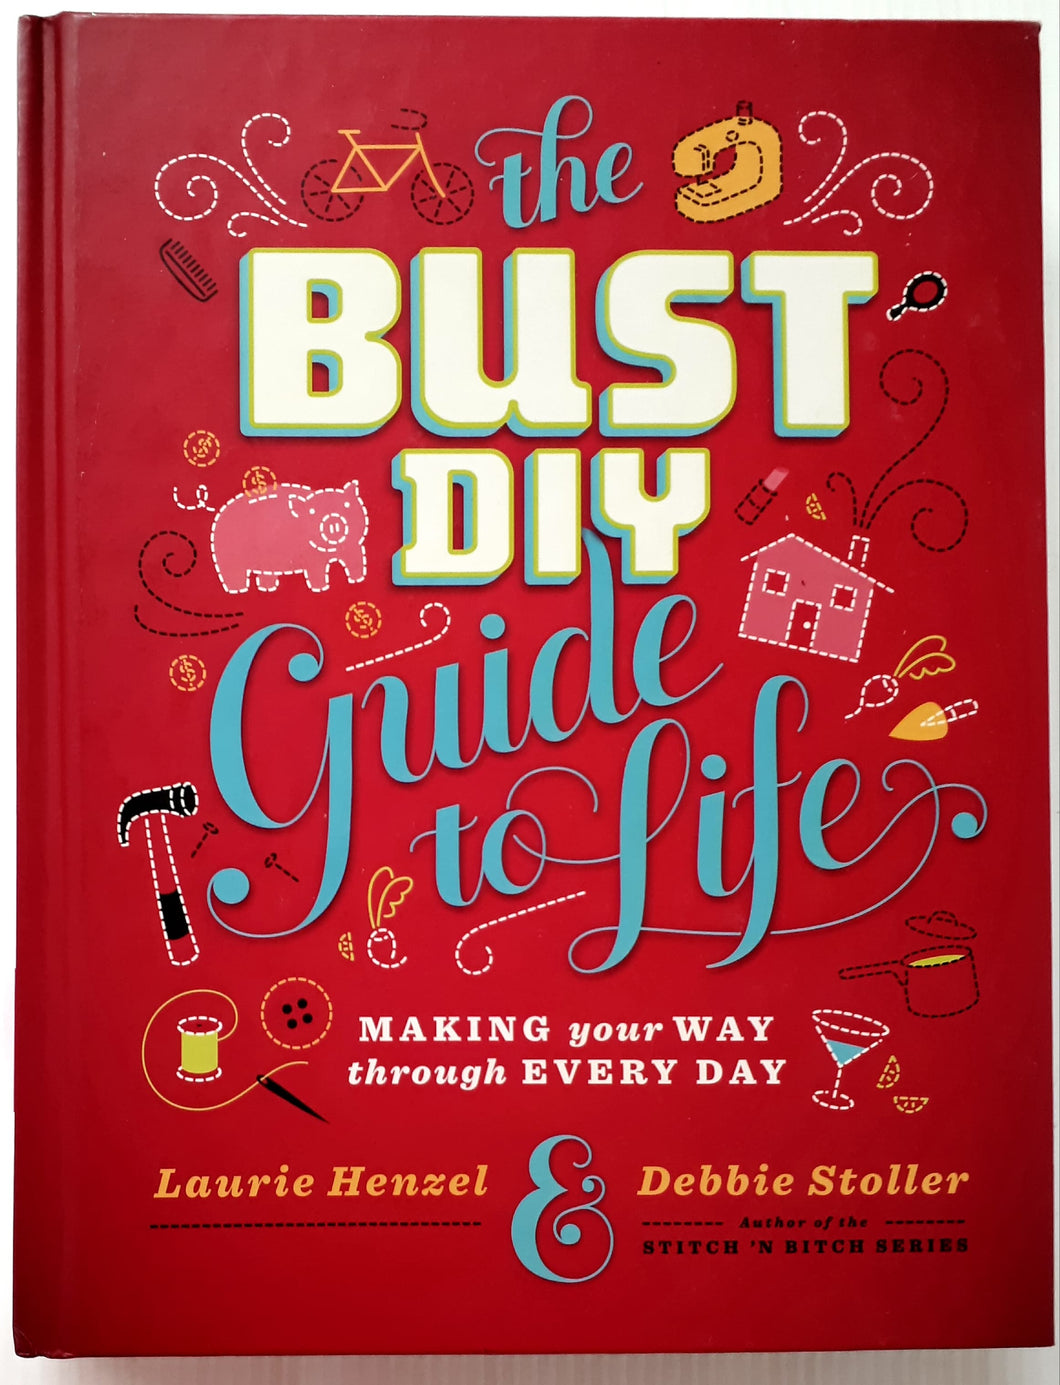 THE BUST DIY GUIDE TO LIFE - Laurie Henzel, Debbie Stoller